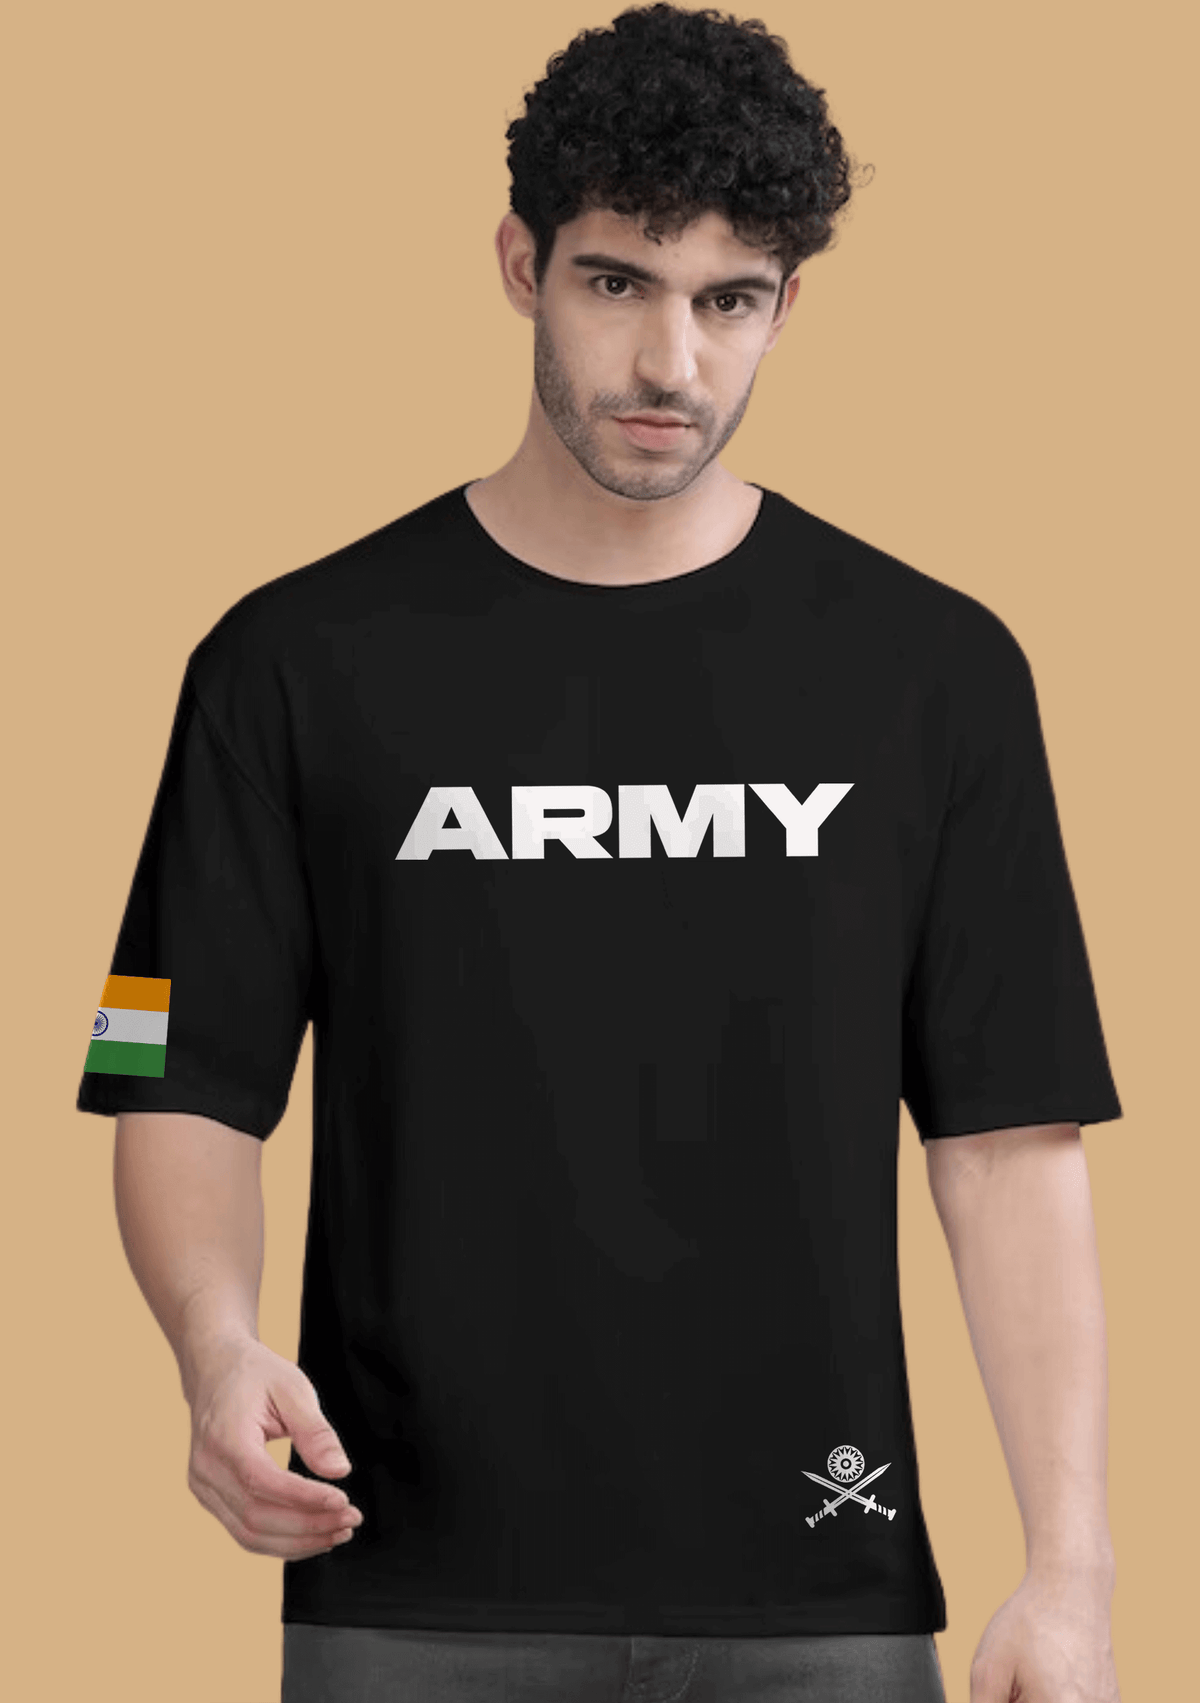 Army printed black color oversized t-shirt by offmint